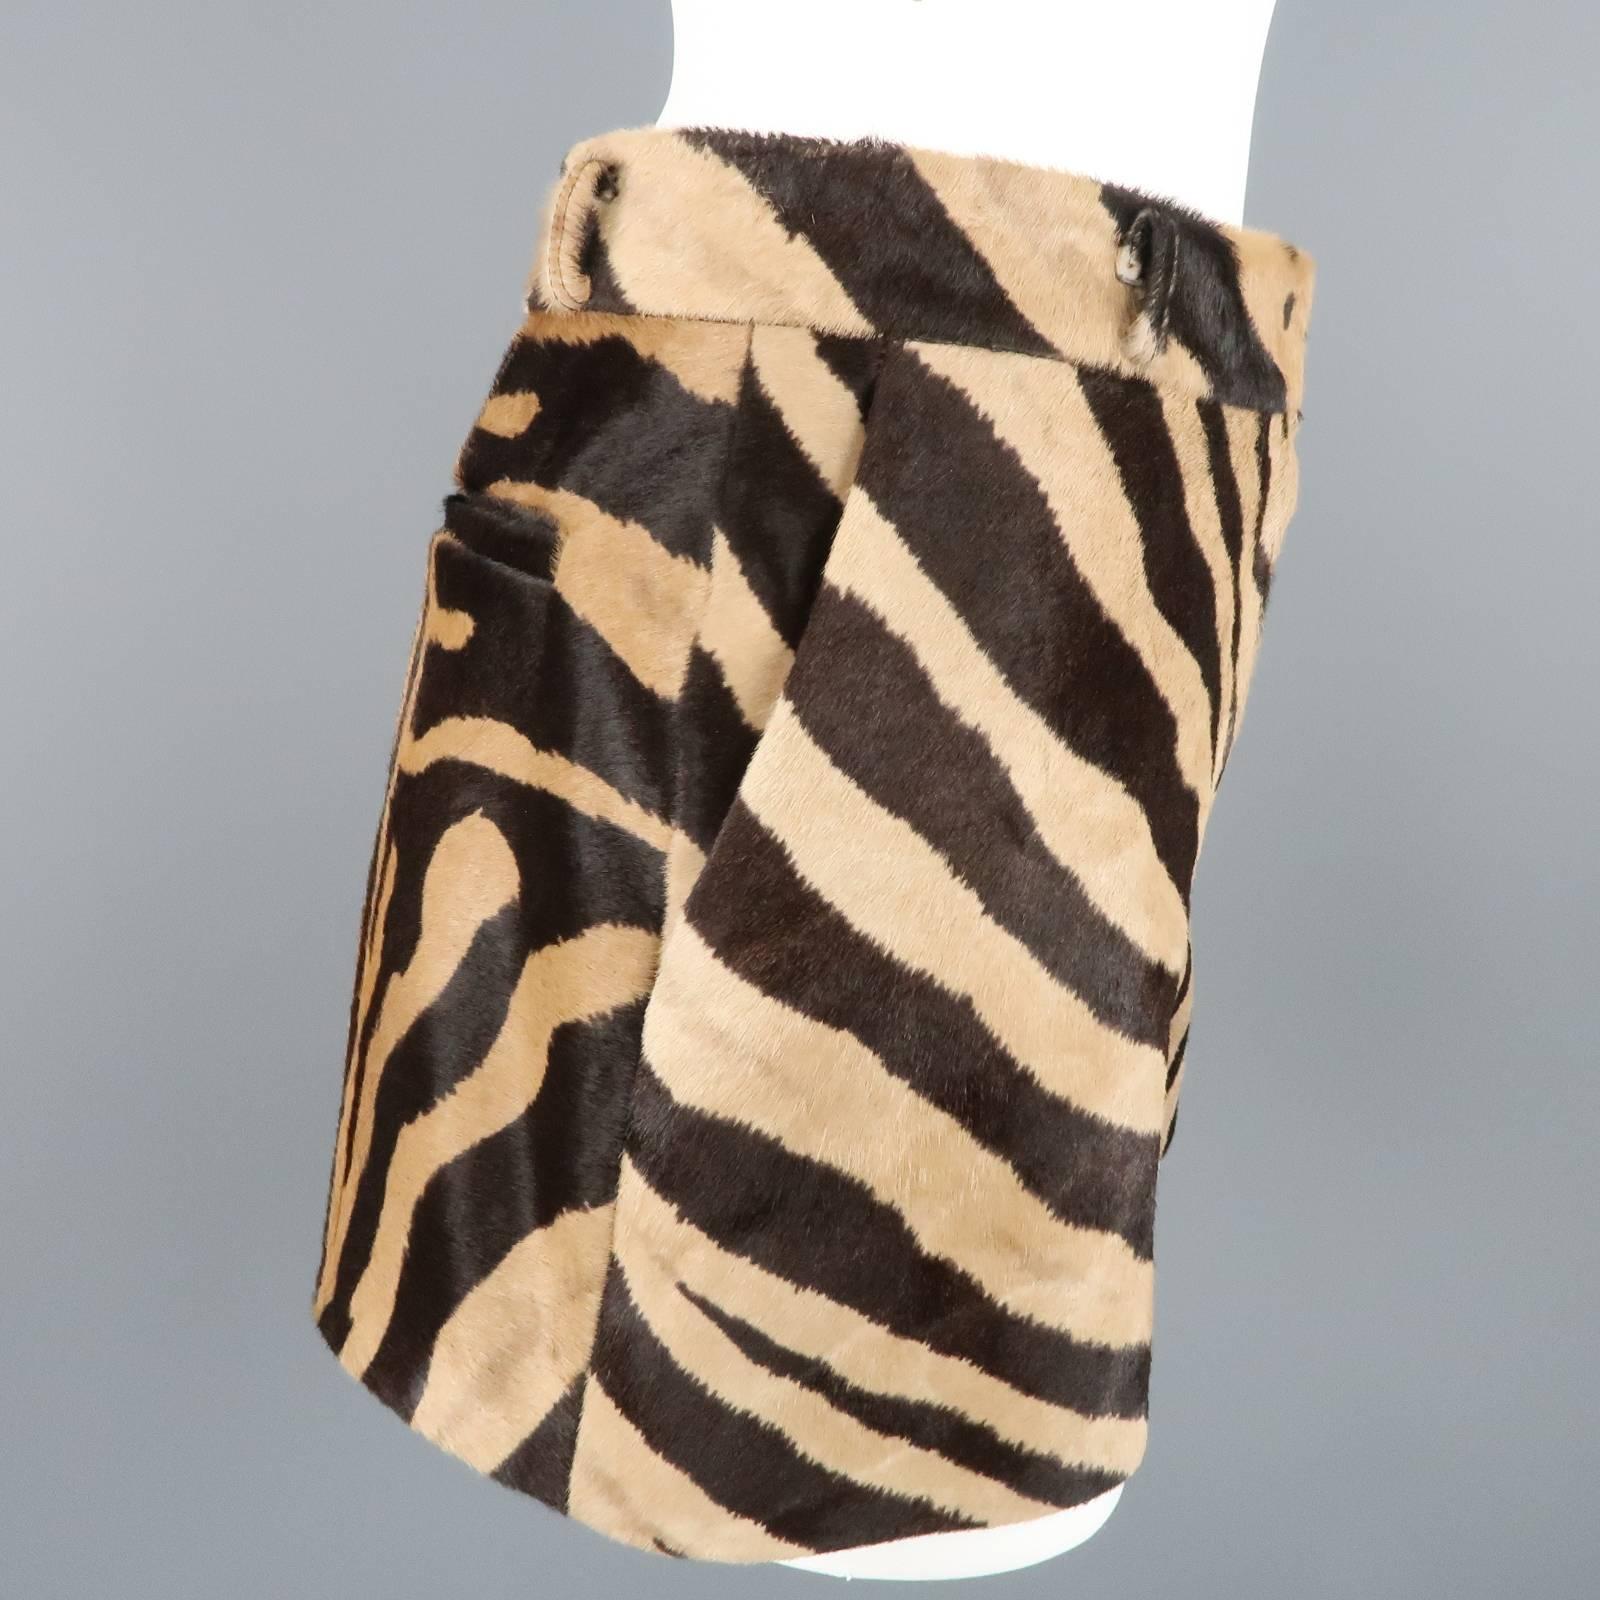 EMILIO PUCCI shorts come in a tan and chocolate brown pony hair leather with all over tiger animal print and feature a high rise and hidden zip closure. Spring 2015. Made in Italy.
 
Good Pre-Owned Condition. Retails: $2,489.00.
Marked: 36
